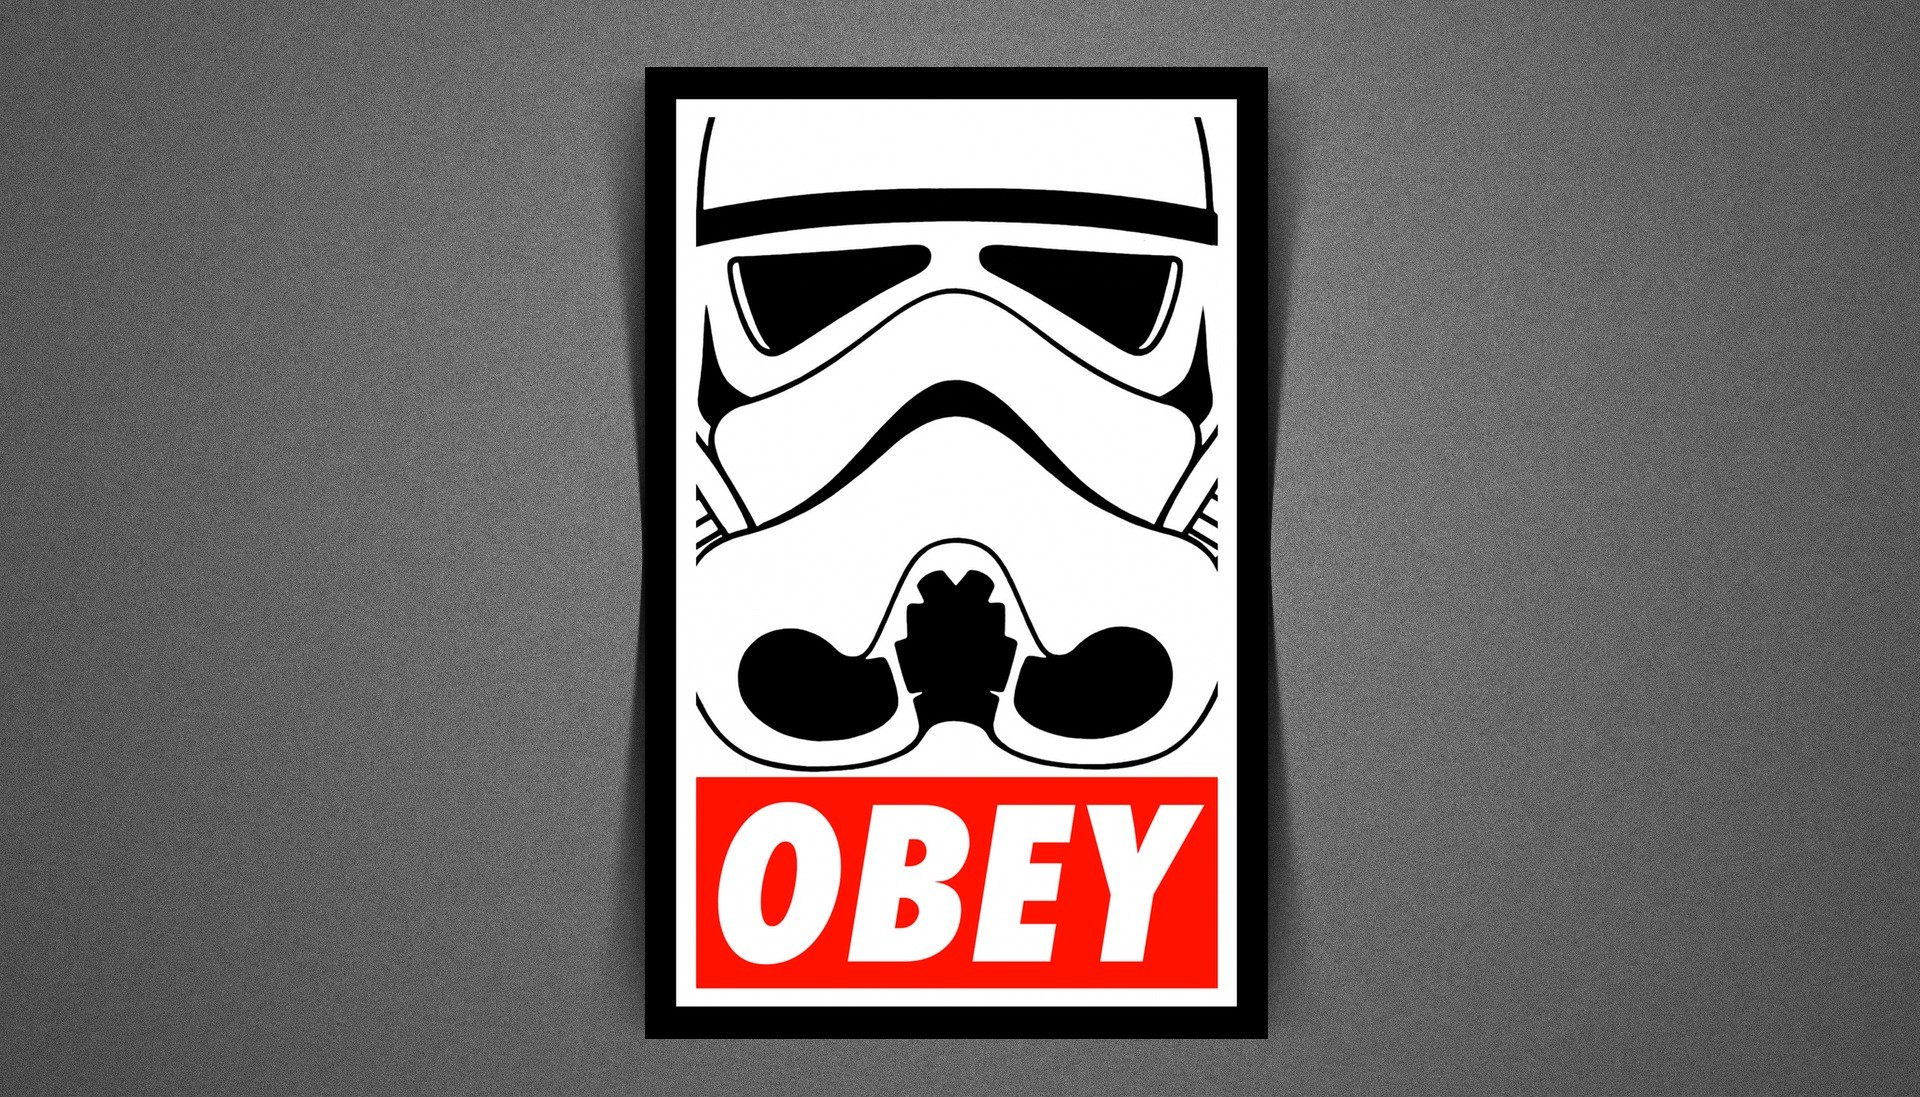 Obey Wallpaper Download Free Awesome Wallpapers For HD Wallpapers Download Free Images Wallpaper [wallpaper981.blogspot.com]